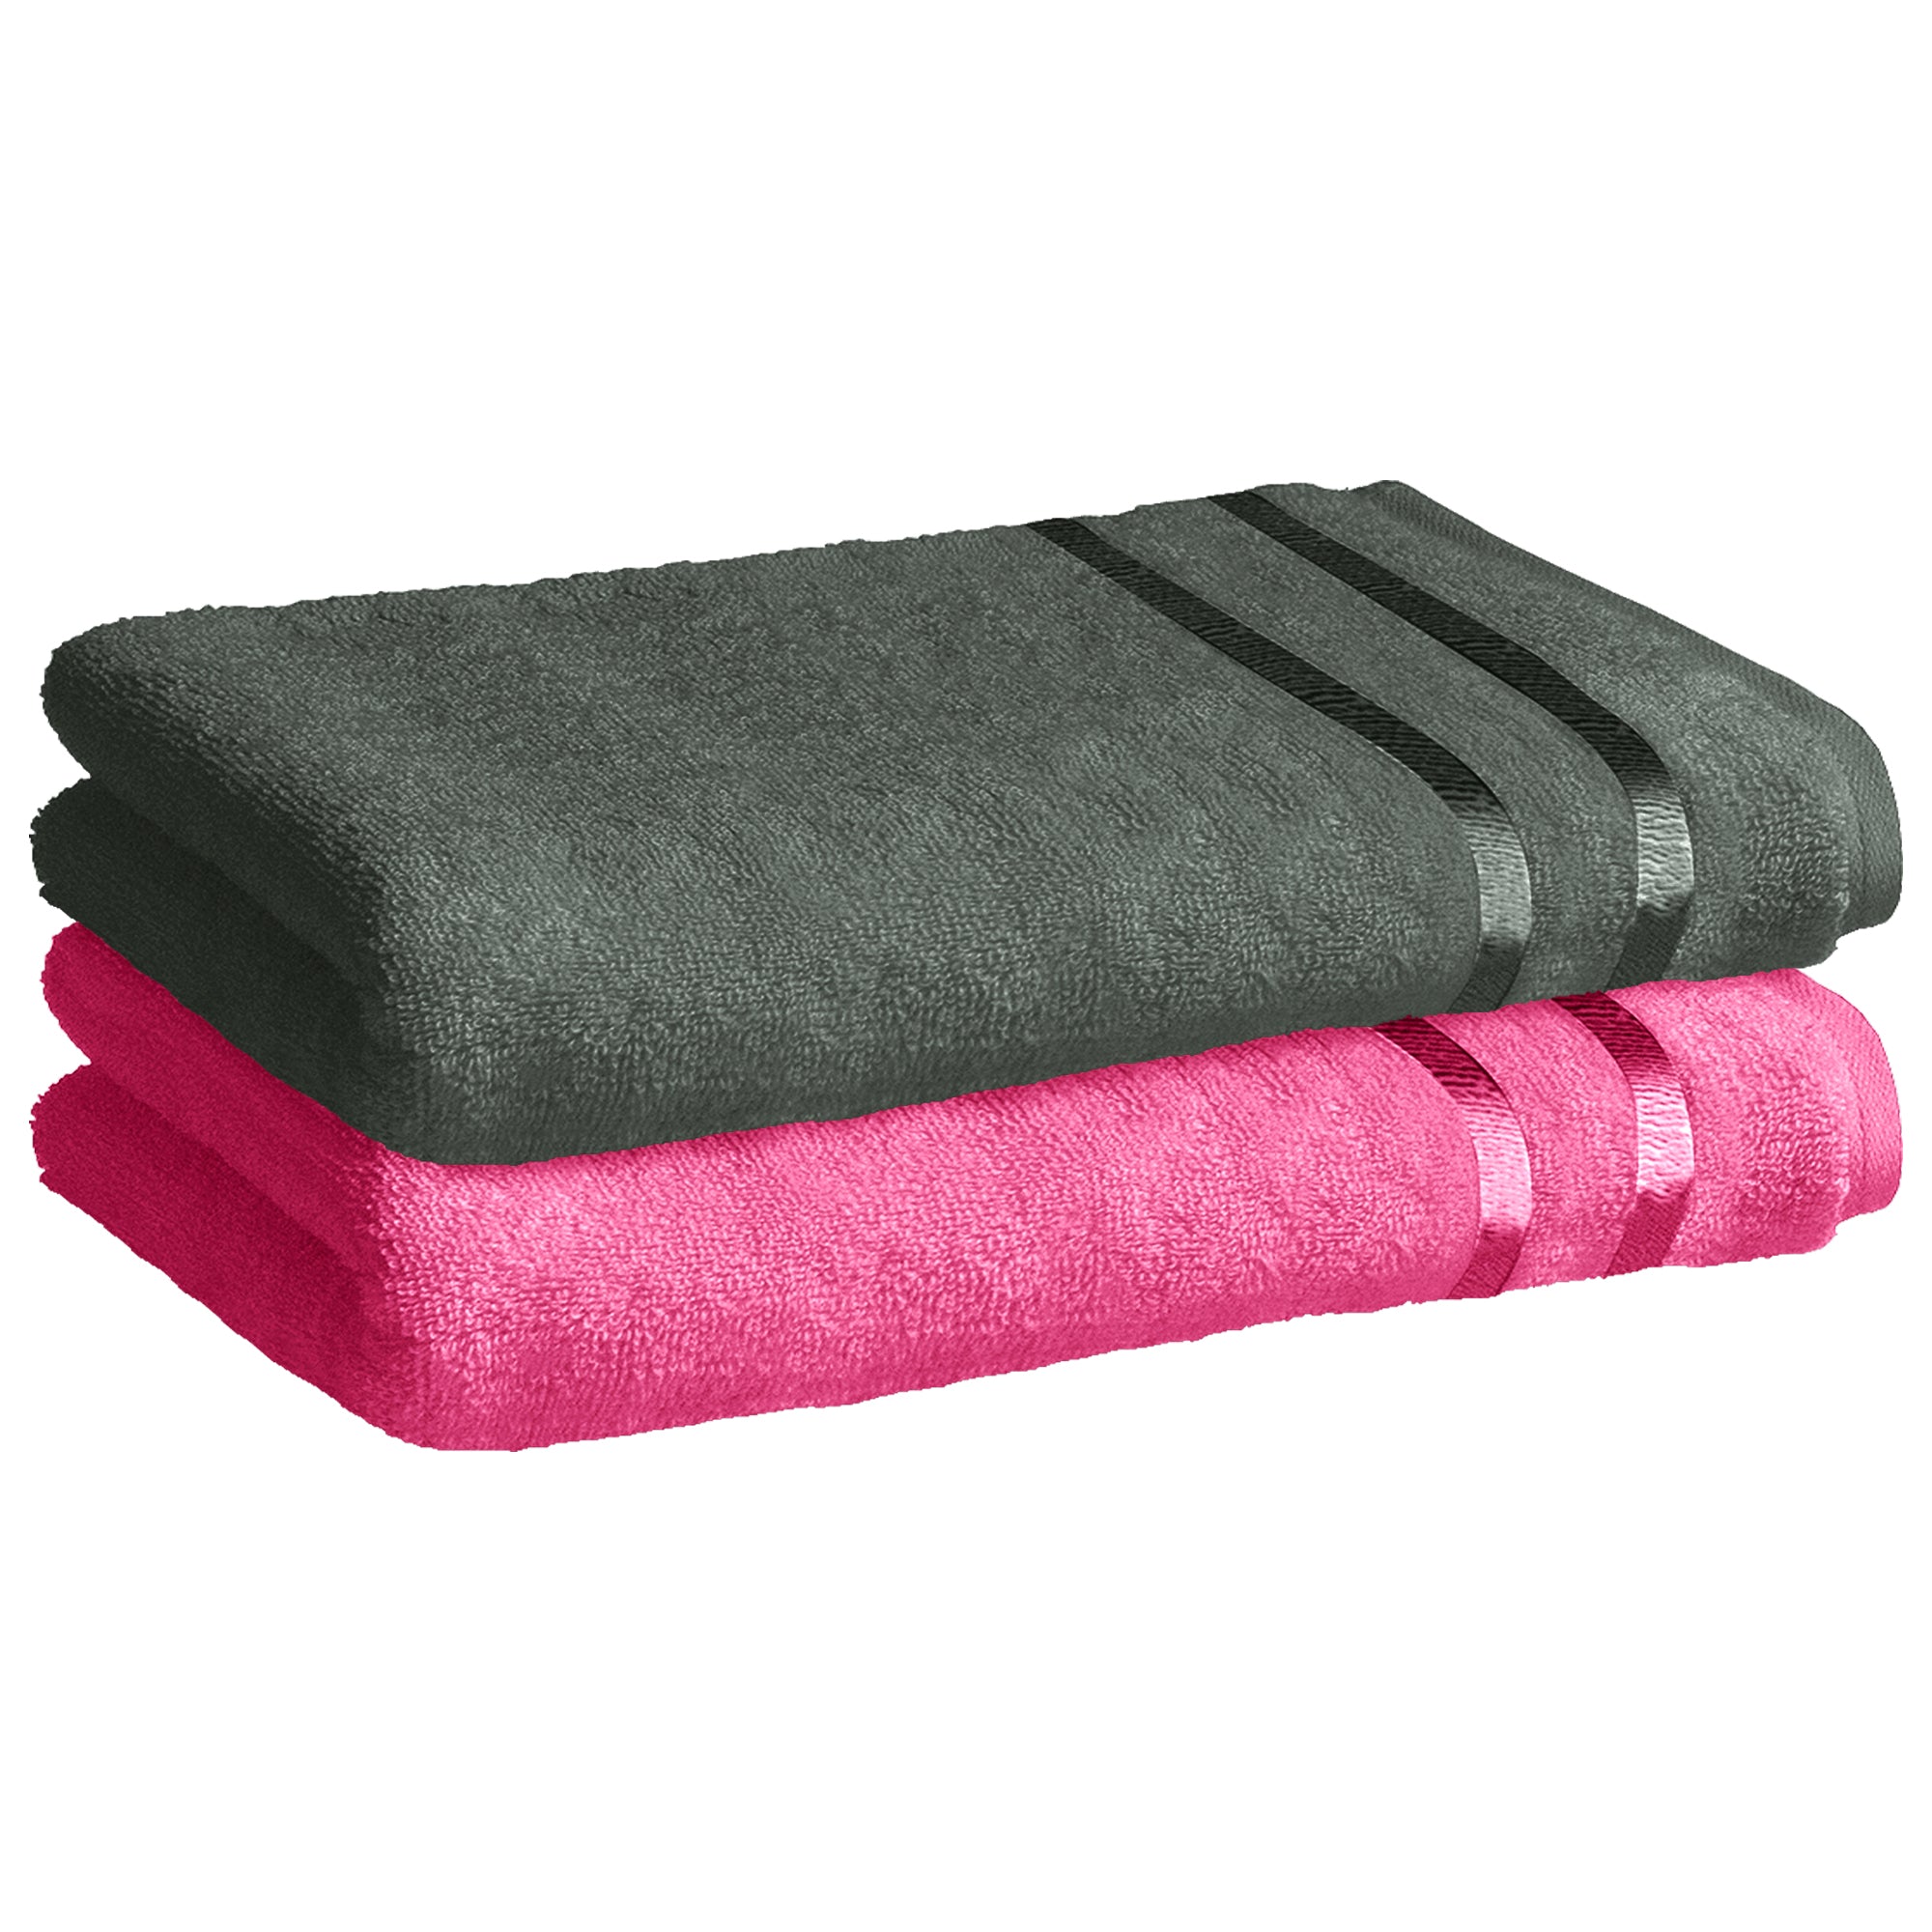 Story@Home 2 Units 100% Cotton Ladies Bath Towels - Pink and Charcoal Grey